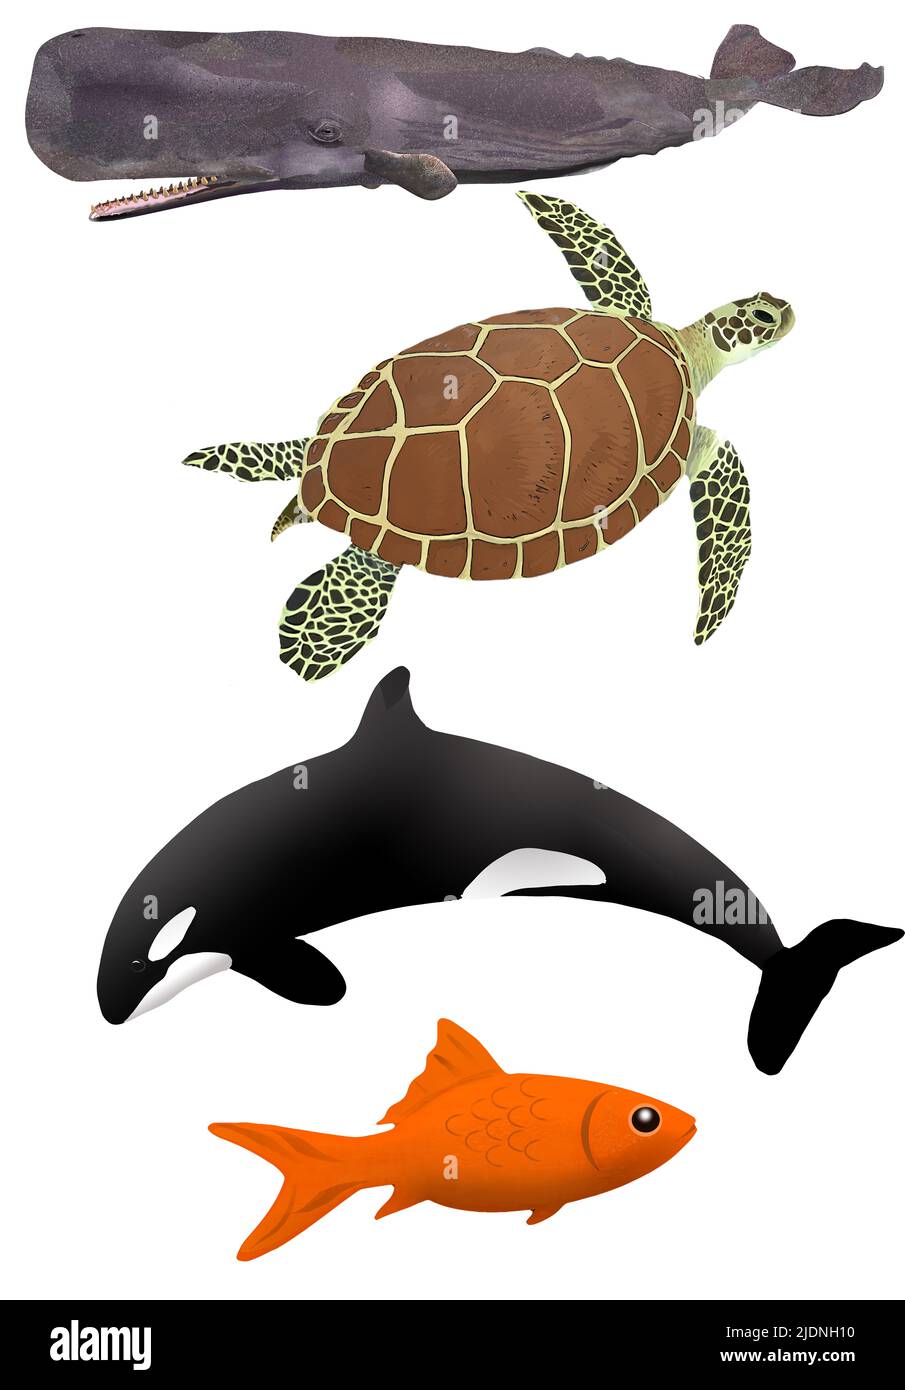 A sperm whale, a green sea turtle and orca and a goldfish are seen as 3-d illustration to be used as graphic elements. Stock Photo